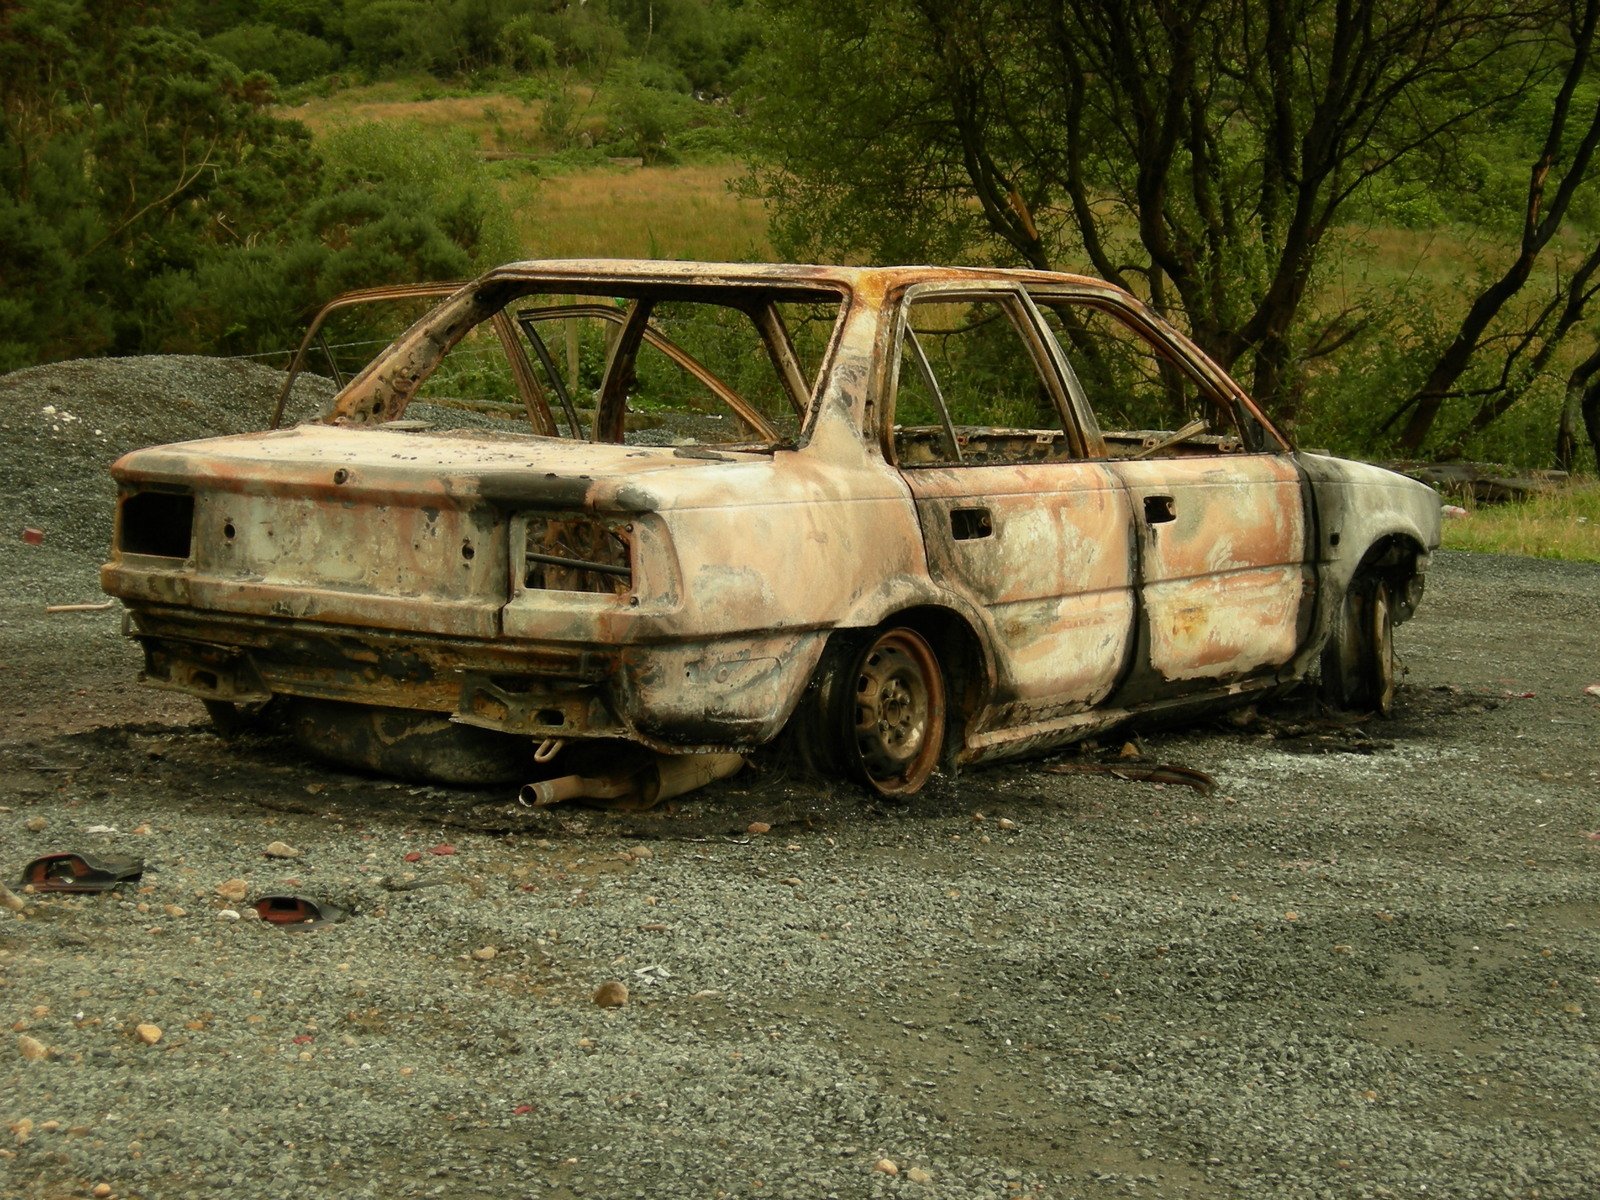 an old, dirty car that has rusted, is parked on a gravel road with trees in the distance